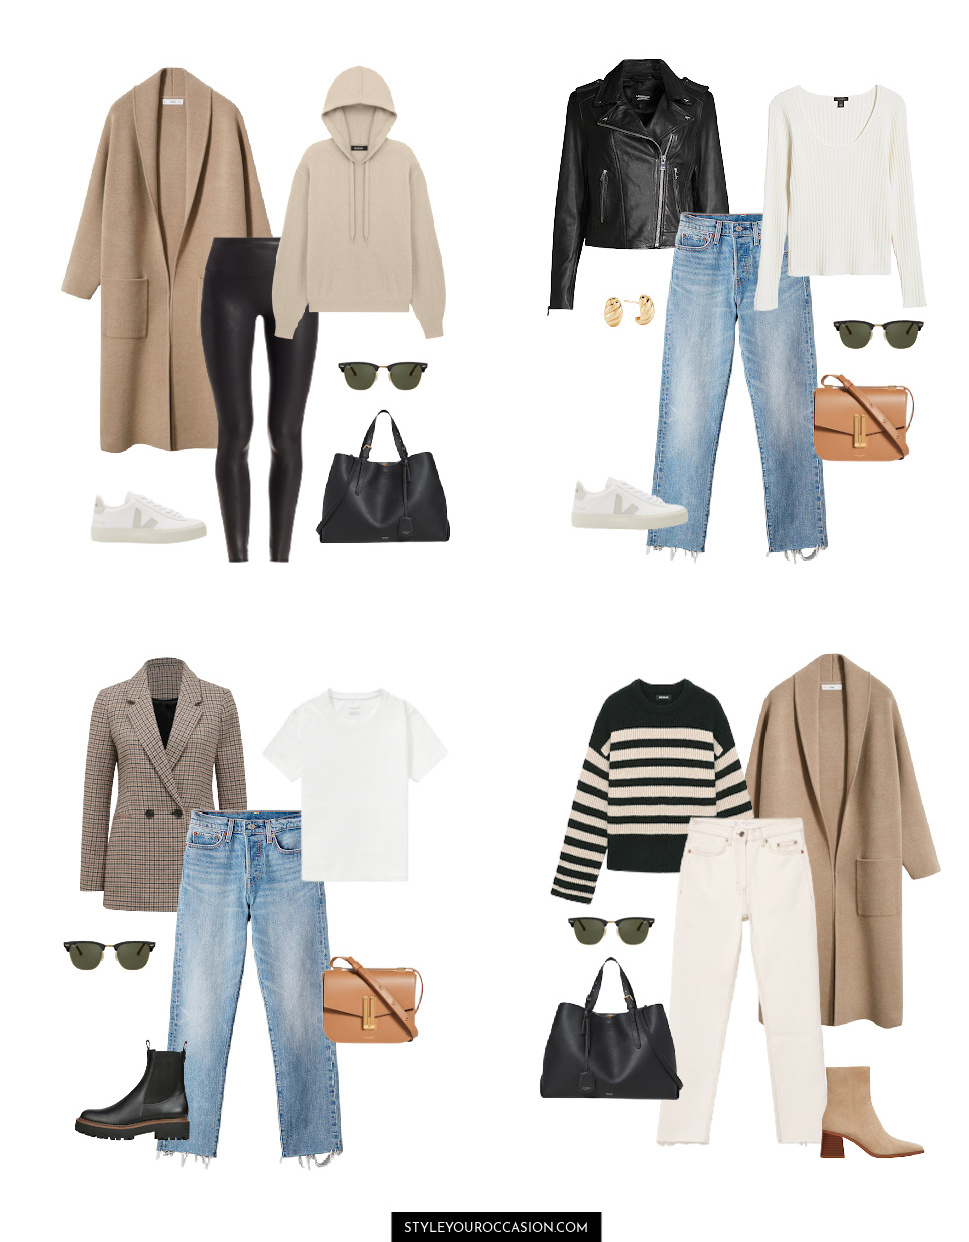 collage of outfits for a fall capsule wardrobe with camel, taupe, black, and white colors